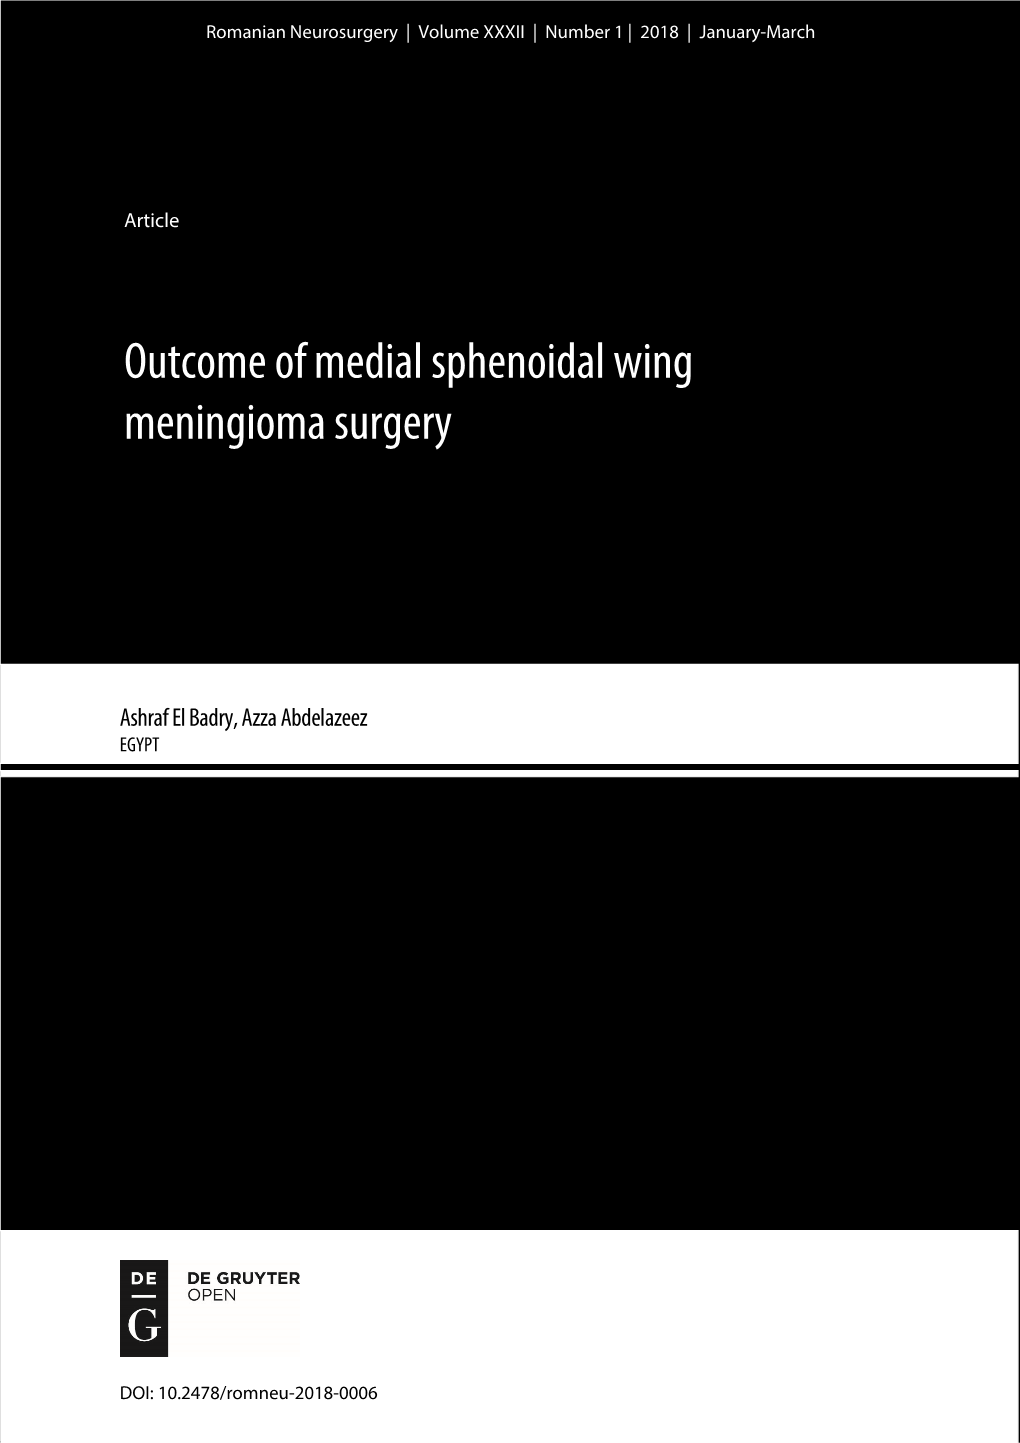 Outcome of Medial Sphenoidal Wing Meningioma Surgery